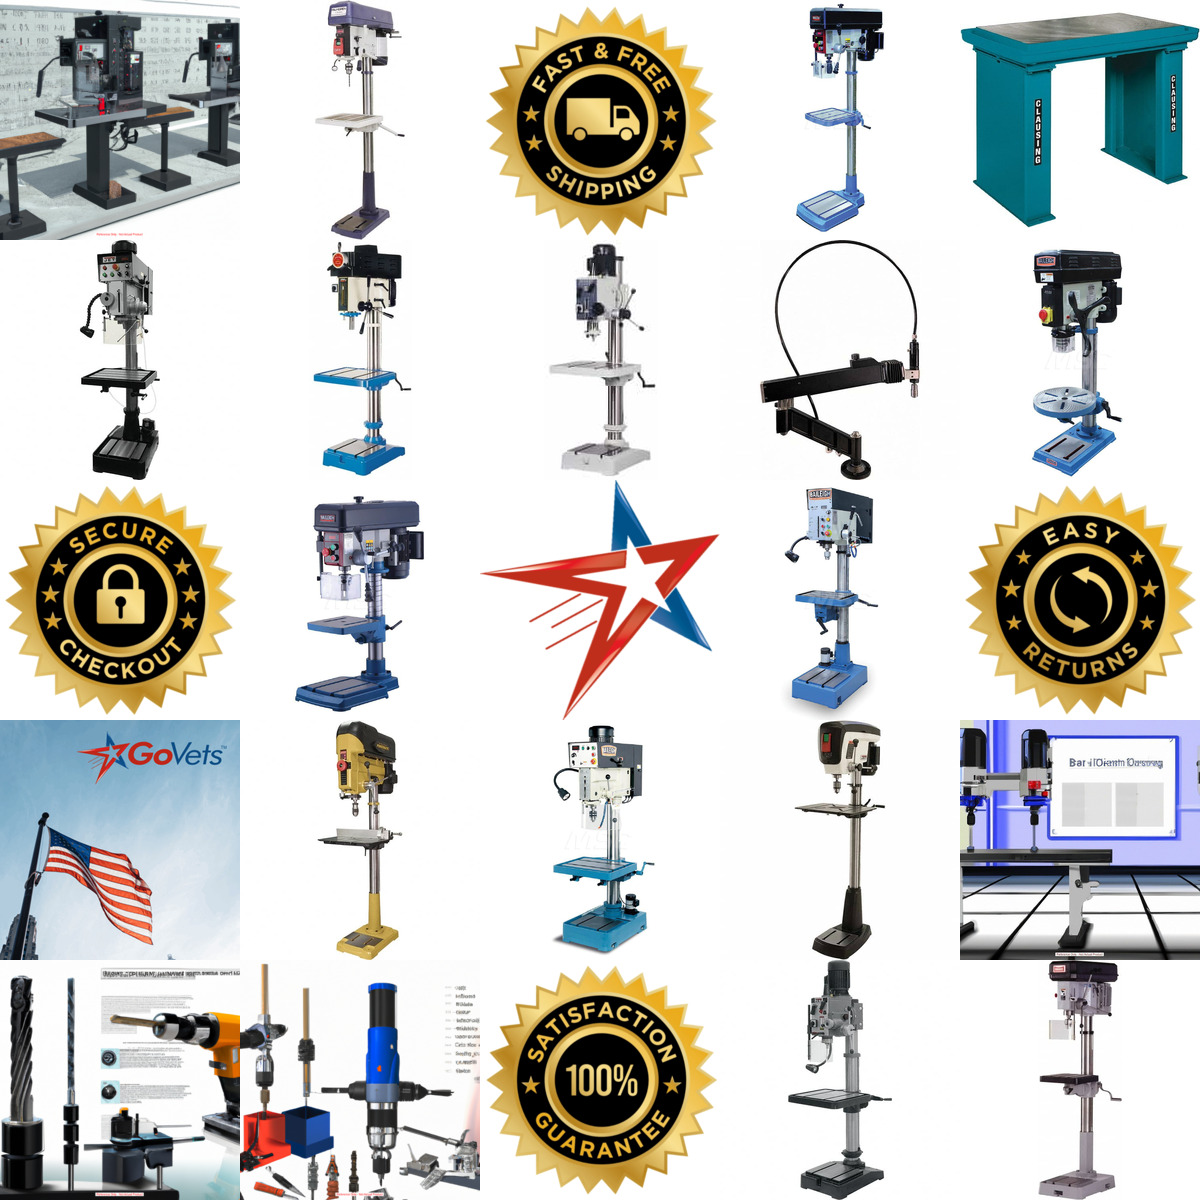 A selection of Drill Presses and Tapping Machines products on GoVets